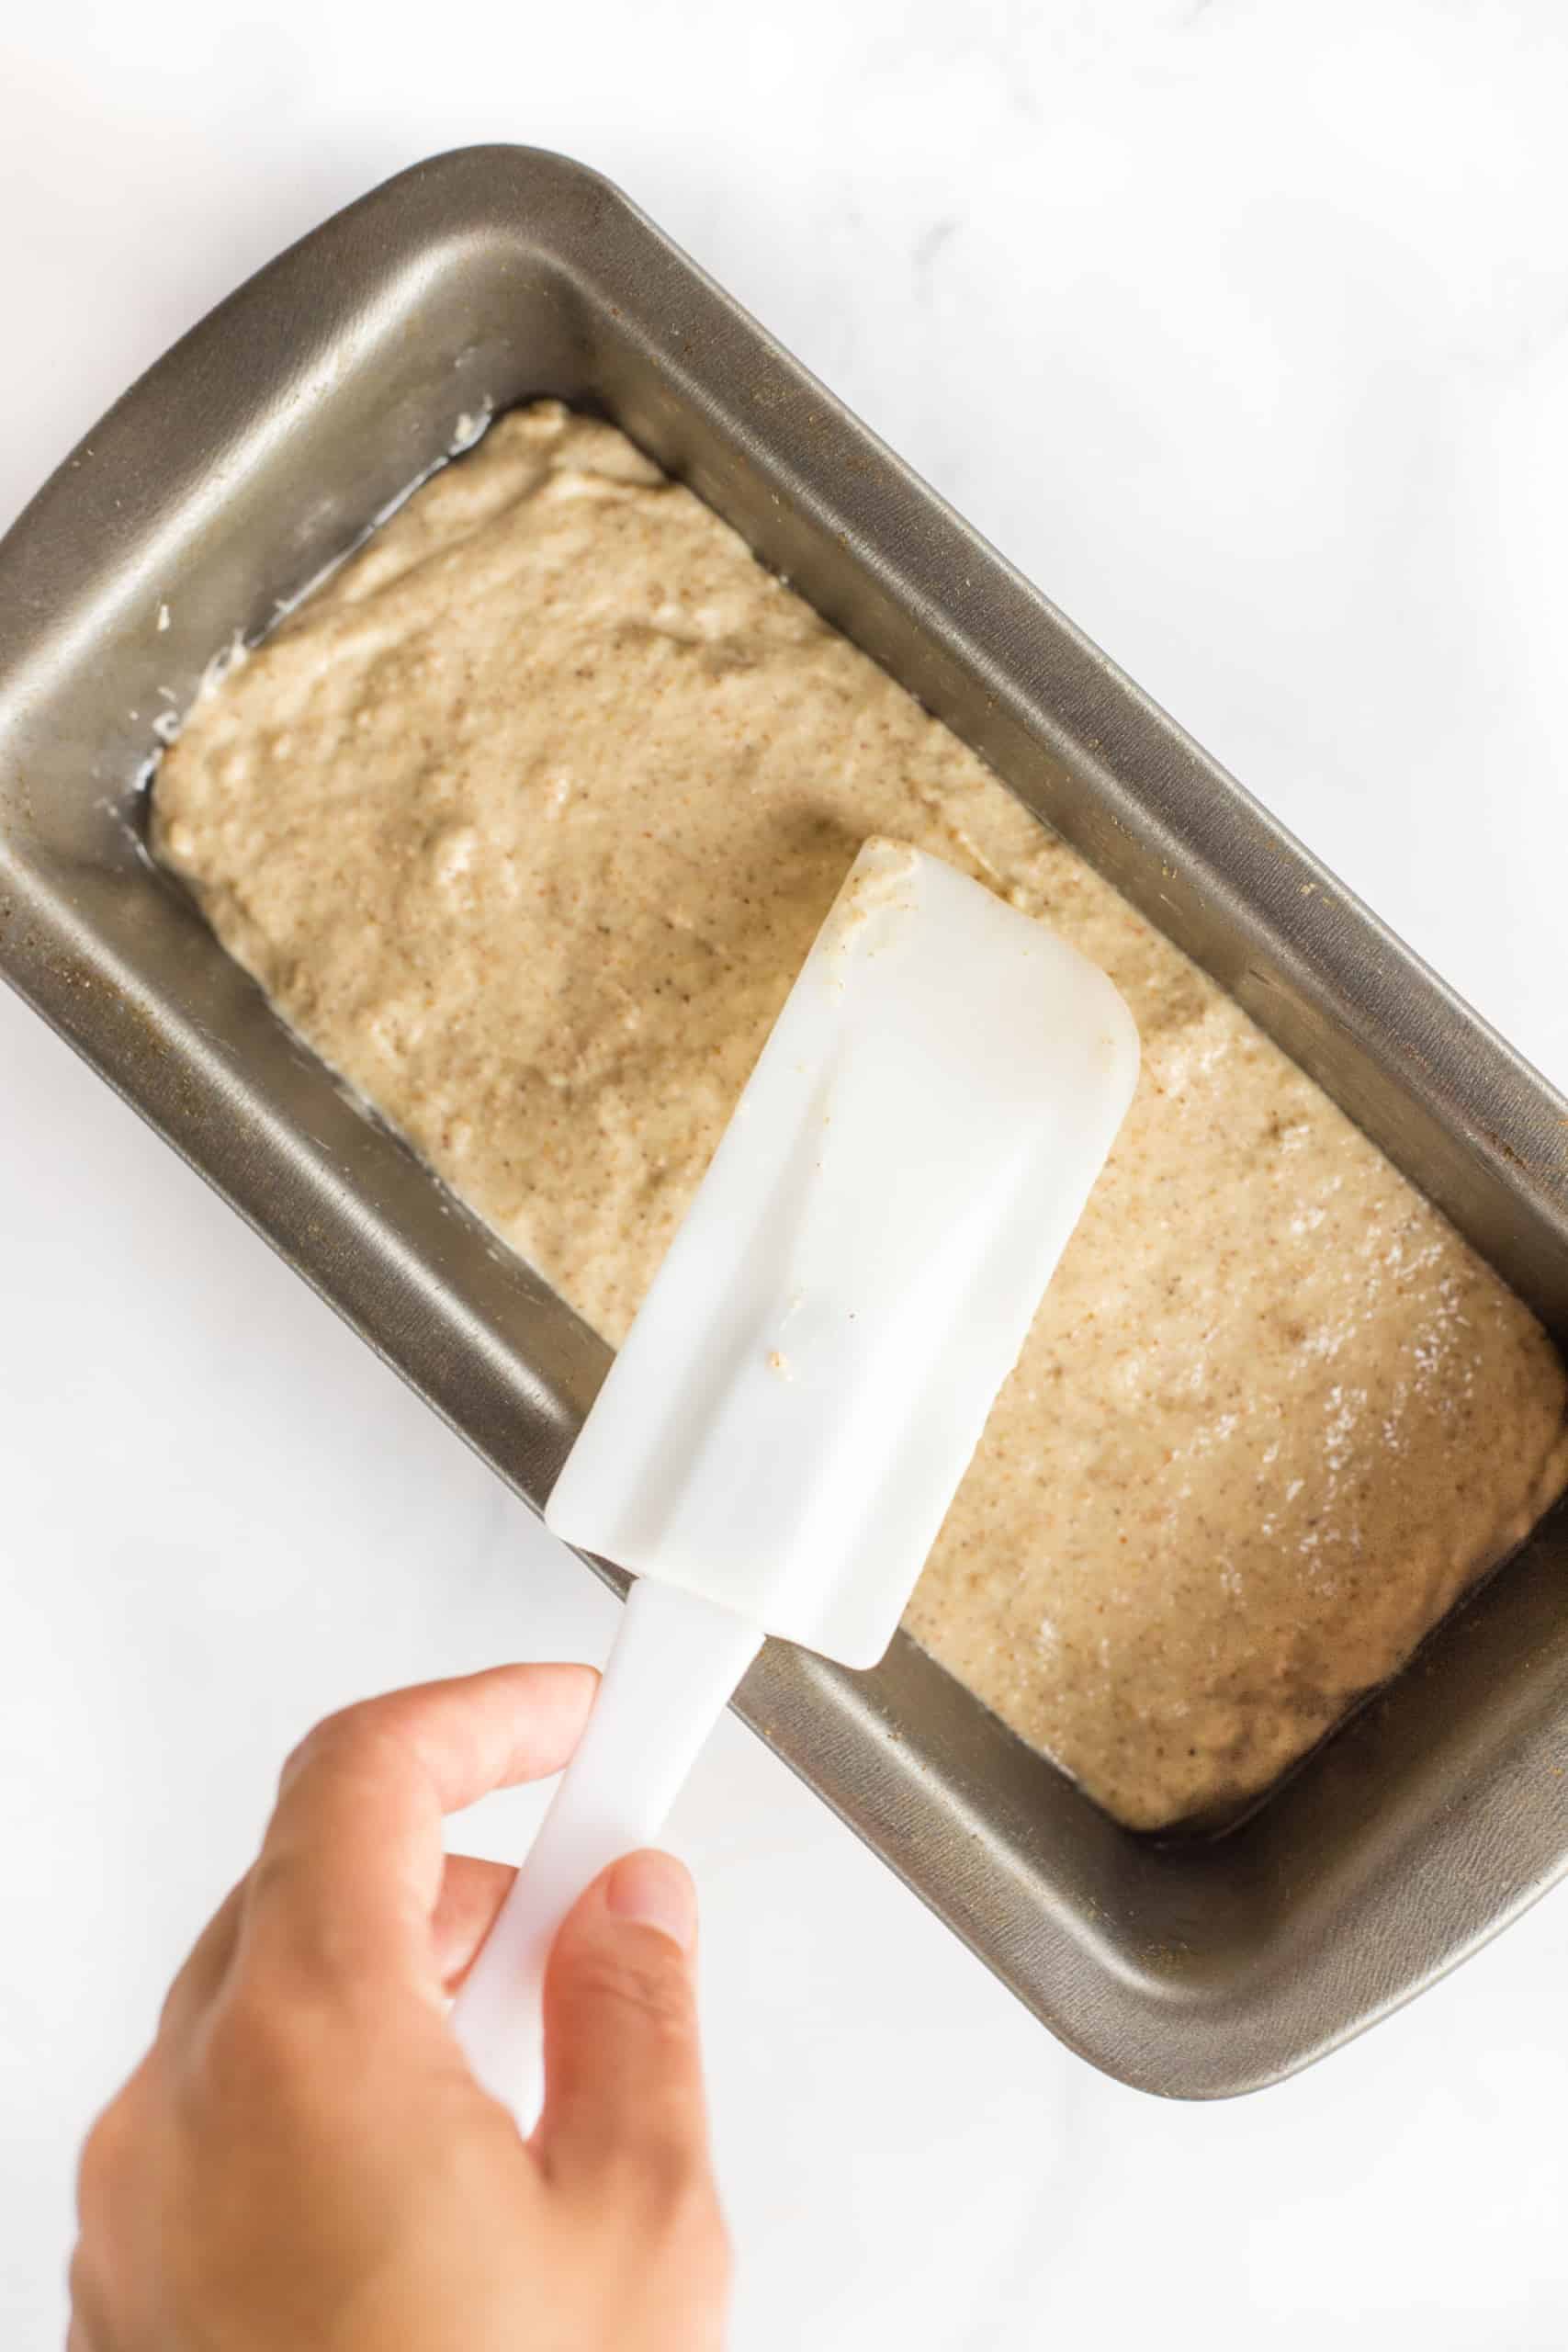 Using a spatula to smooth out the top of bread batter in a loaf pan.